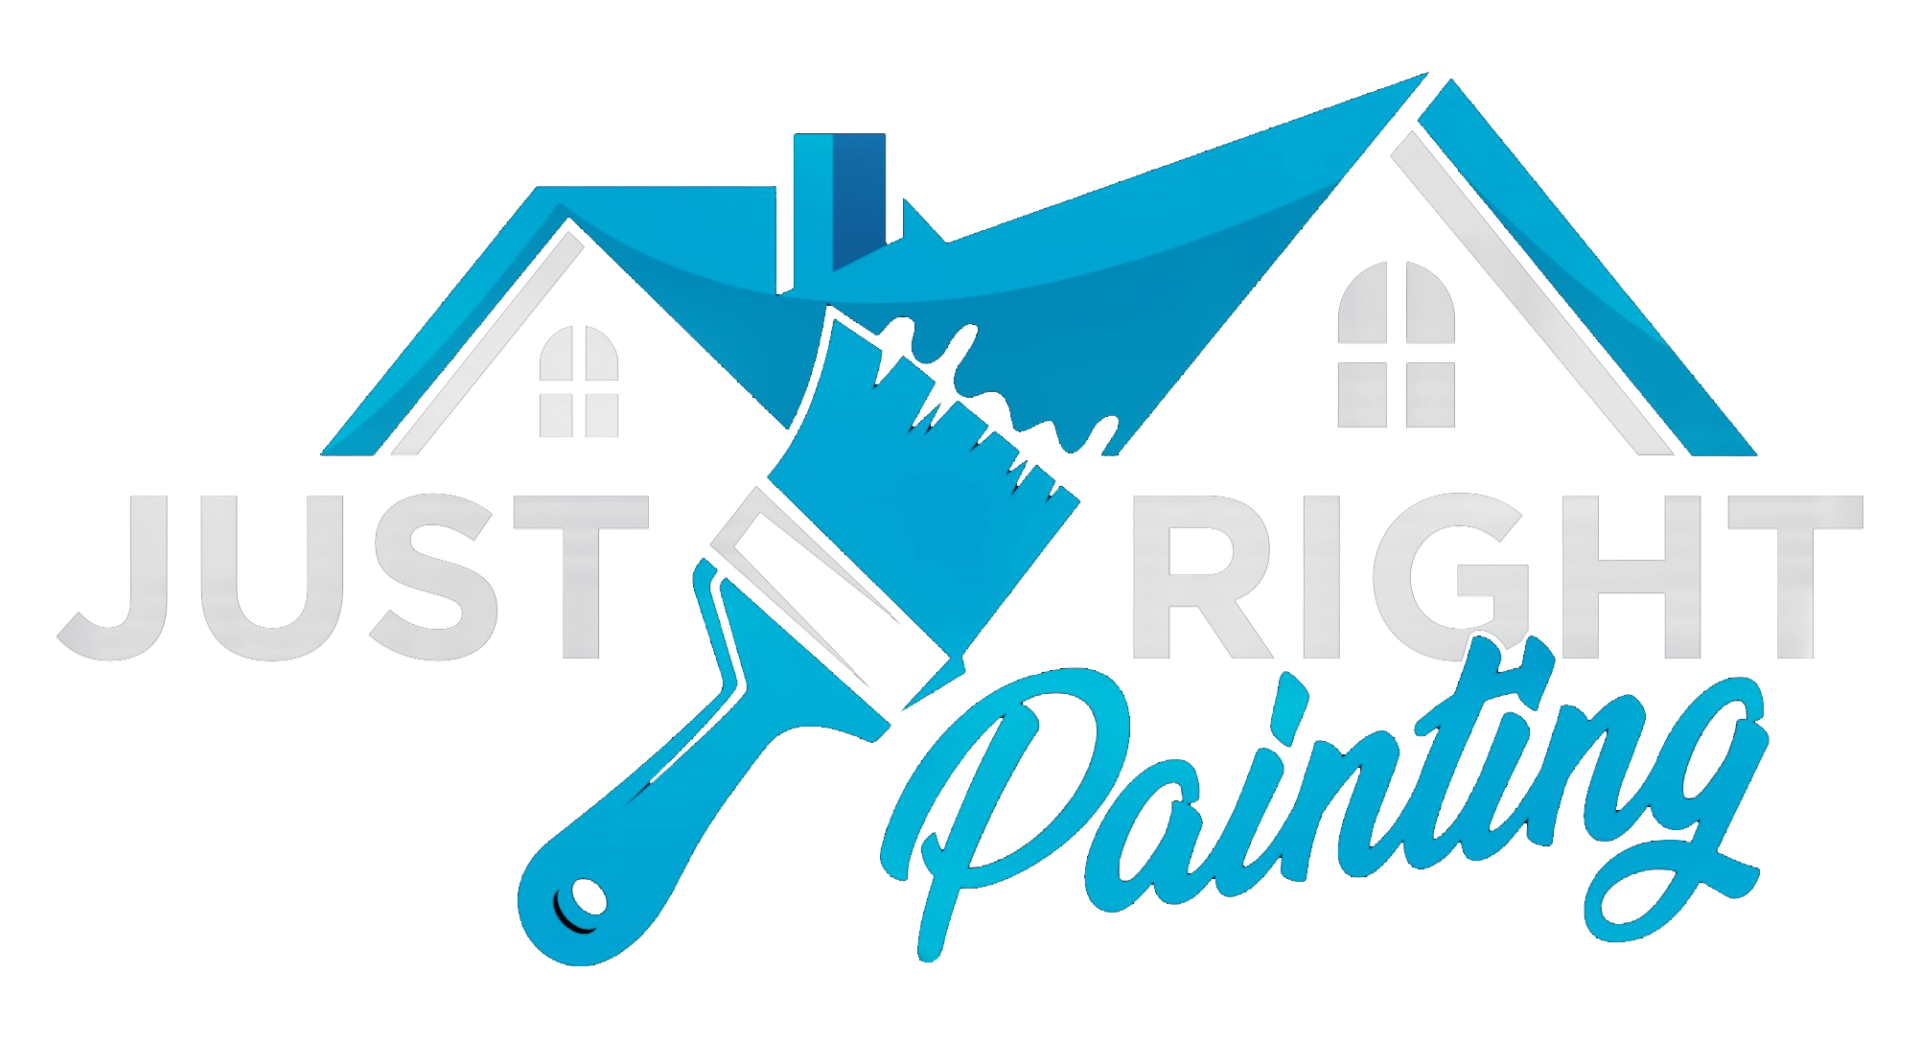 Logo for Just Right Painting featuring a dynamic blue paintbrush over a stylized house, designed to stand out on dark backgrounds.